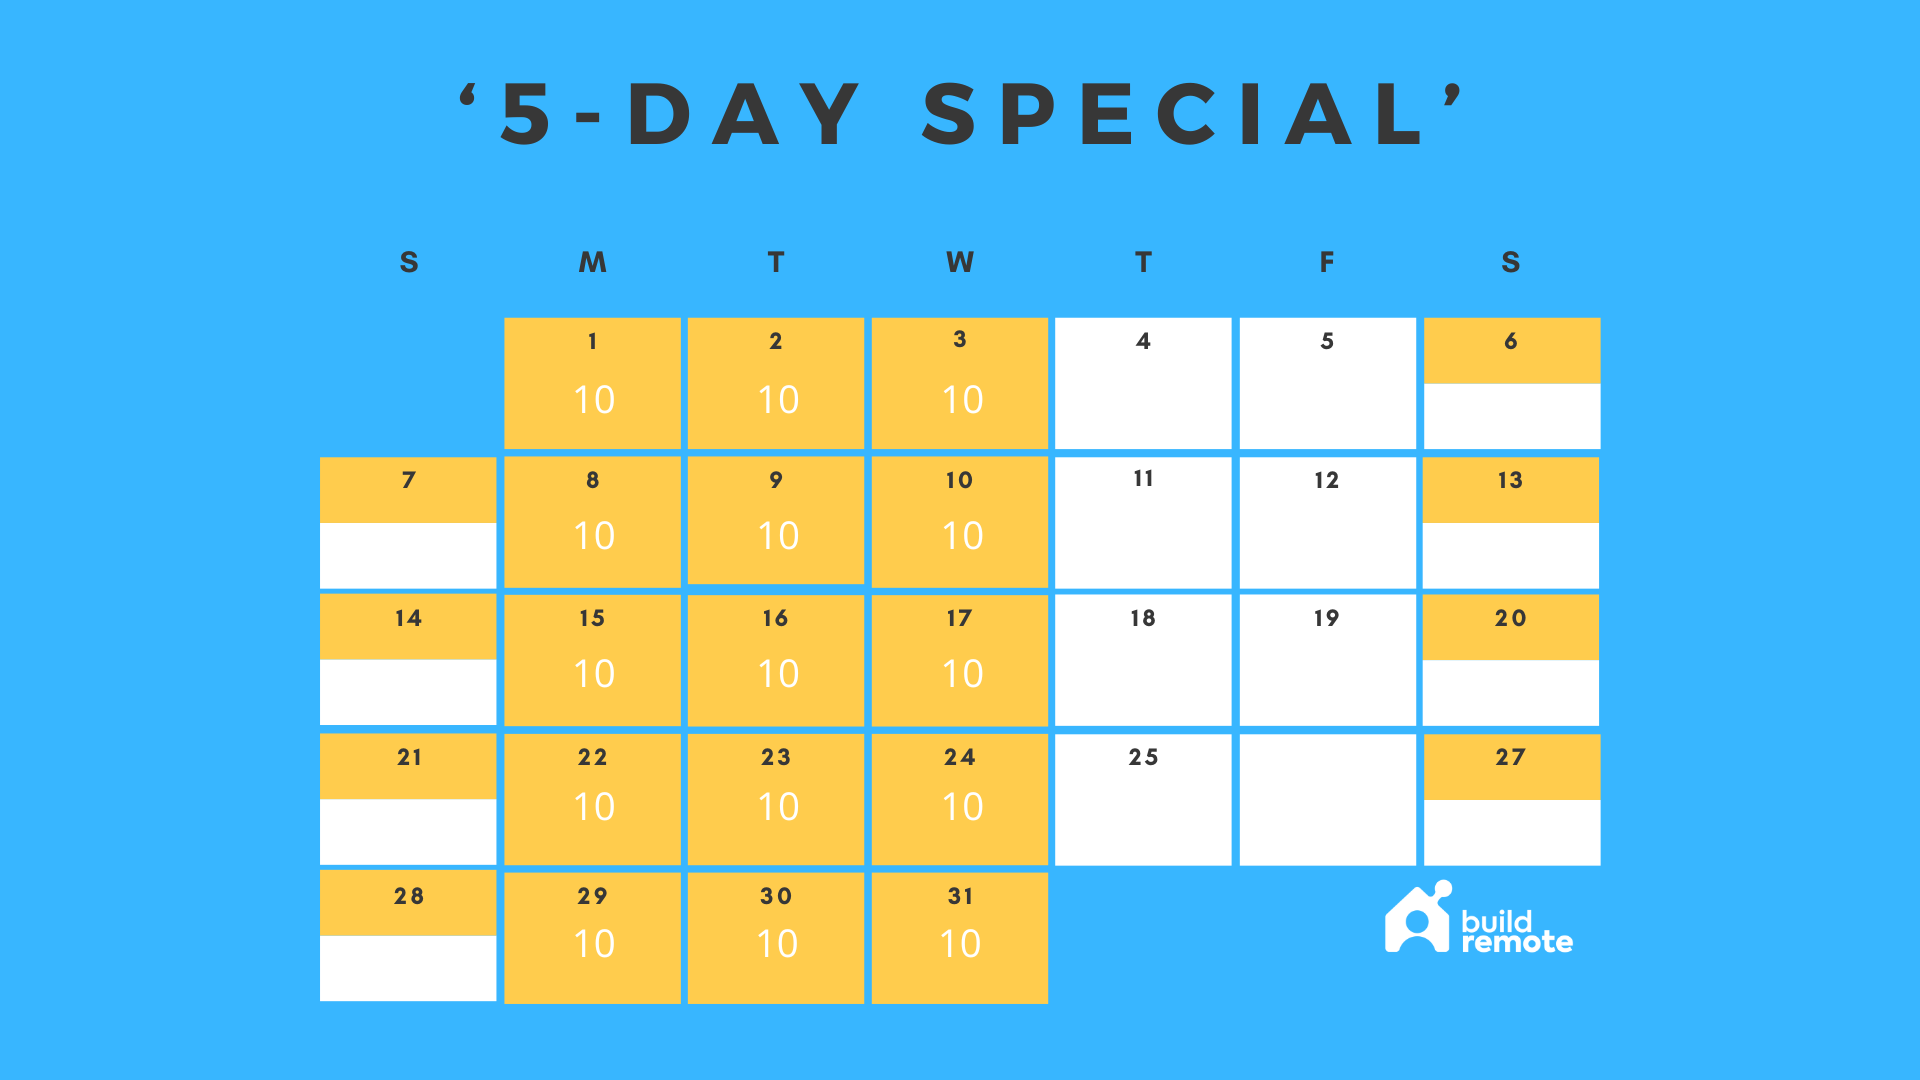 Five-day special work schedule